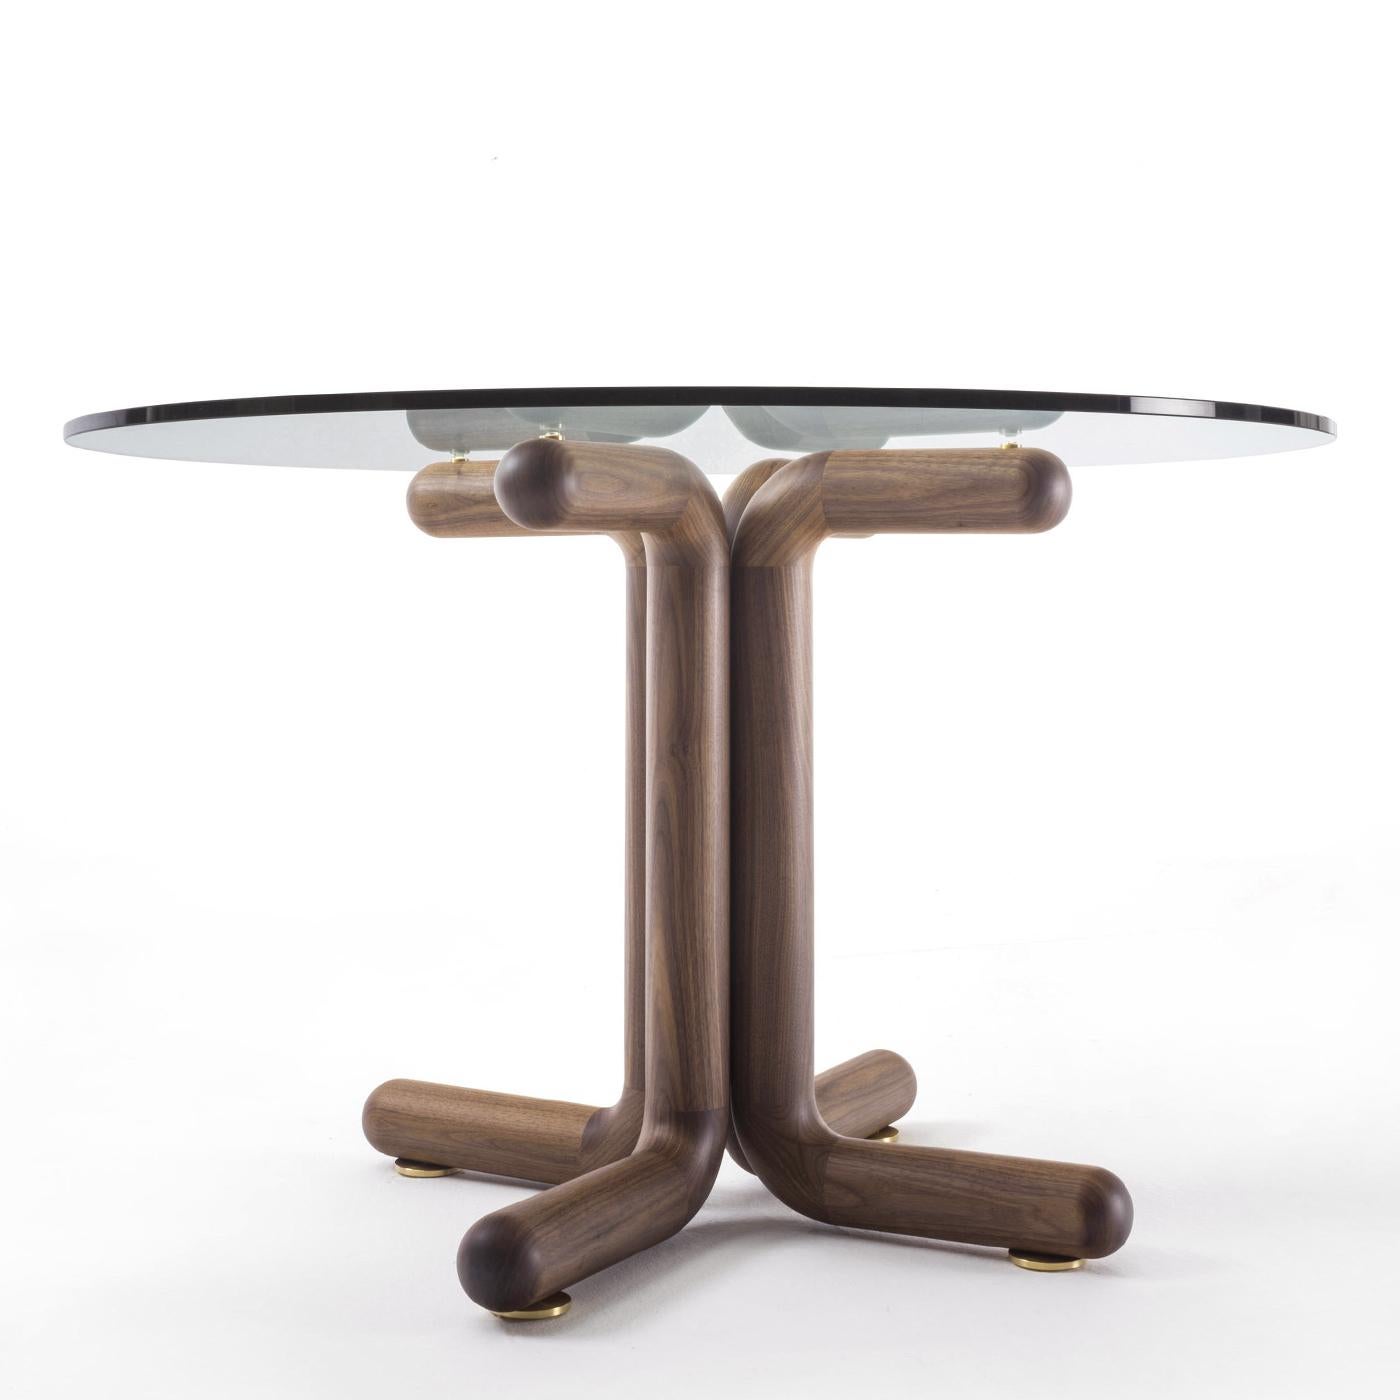 Table Ariana Walnut Round with solid walnut base and with 
clear tempered glass top, 12mm thickness. With brushed brass 
feet under the base. 
Also available on request in:
Diameter 150xH75cm, price: 7900,00€.
Diameter 140xH75cm, price: